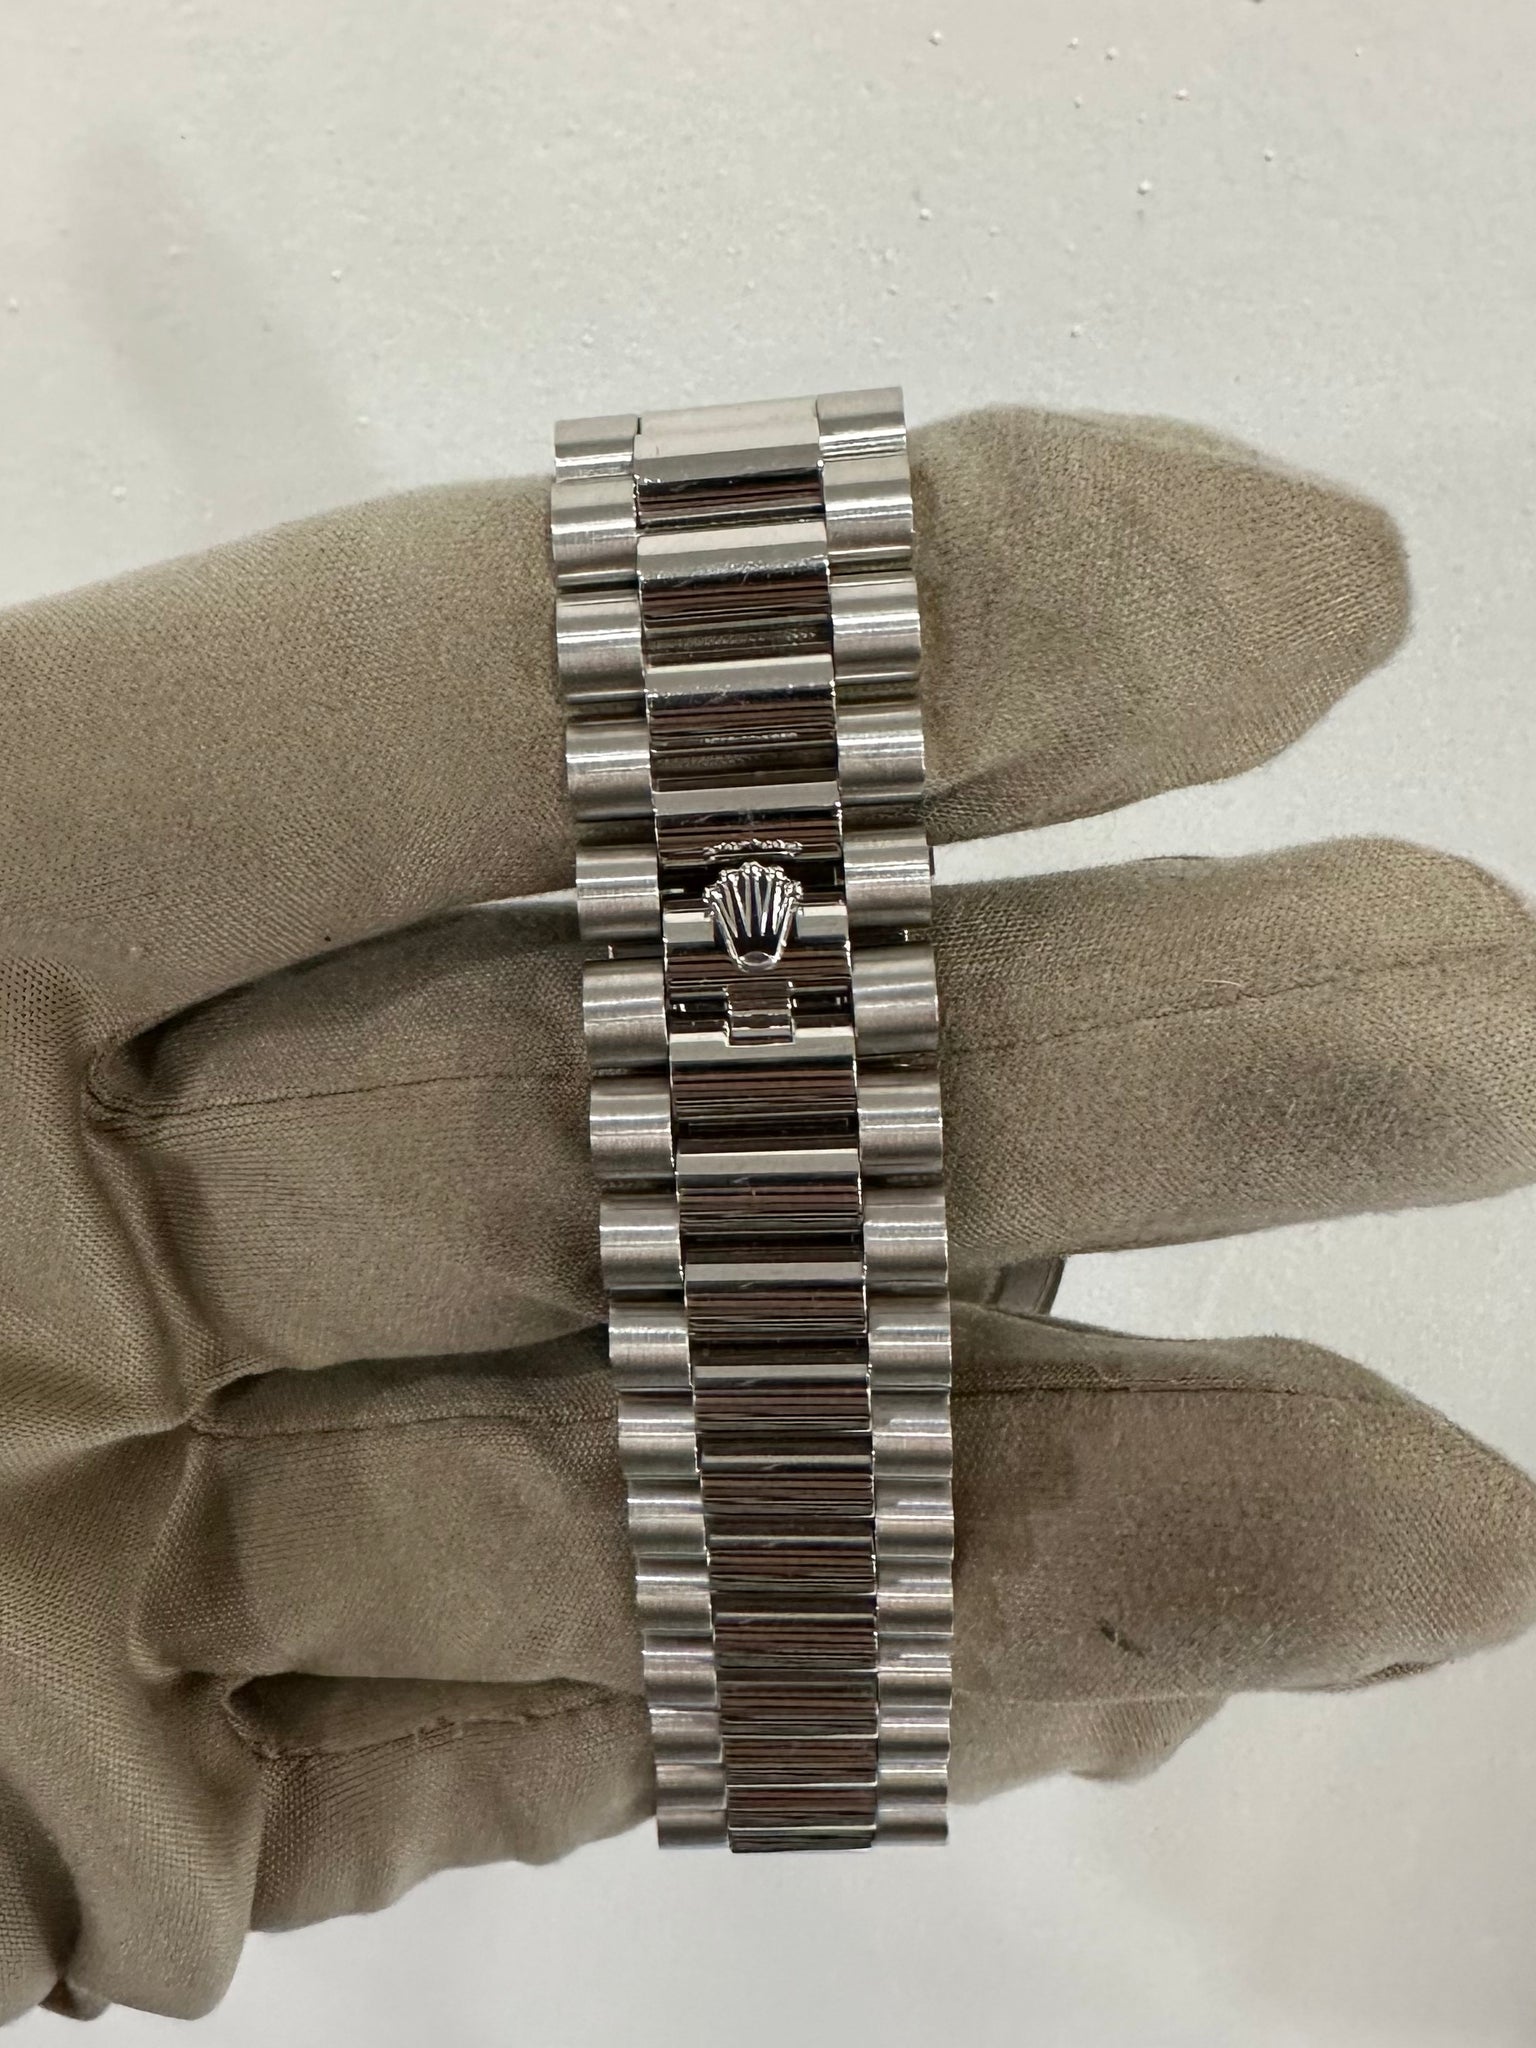 Rolex Day-Date 40 Platinum with baguette diamond dial